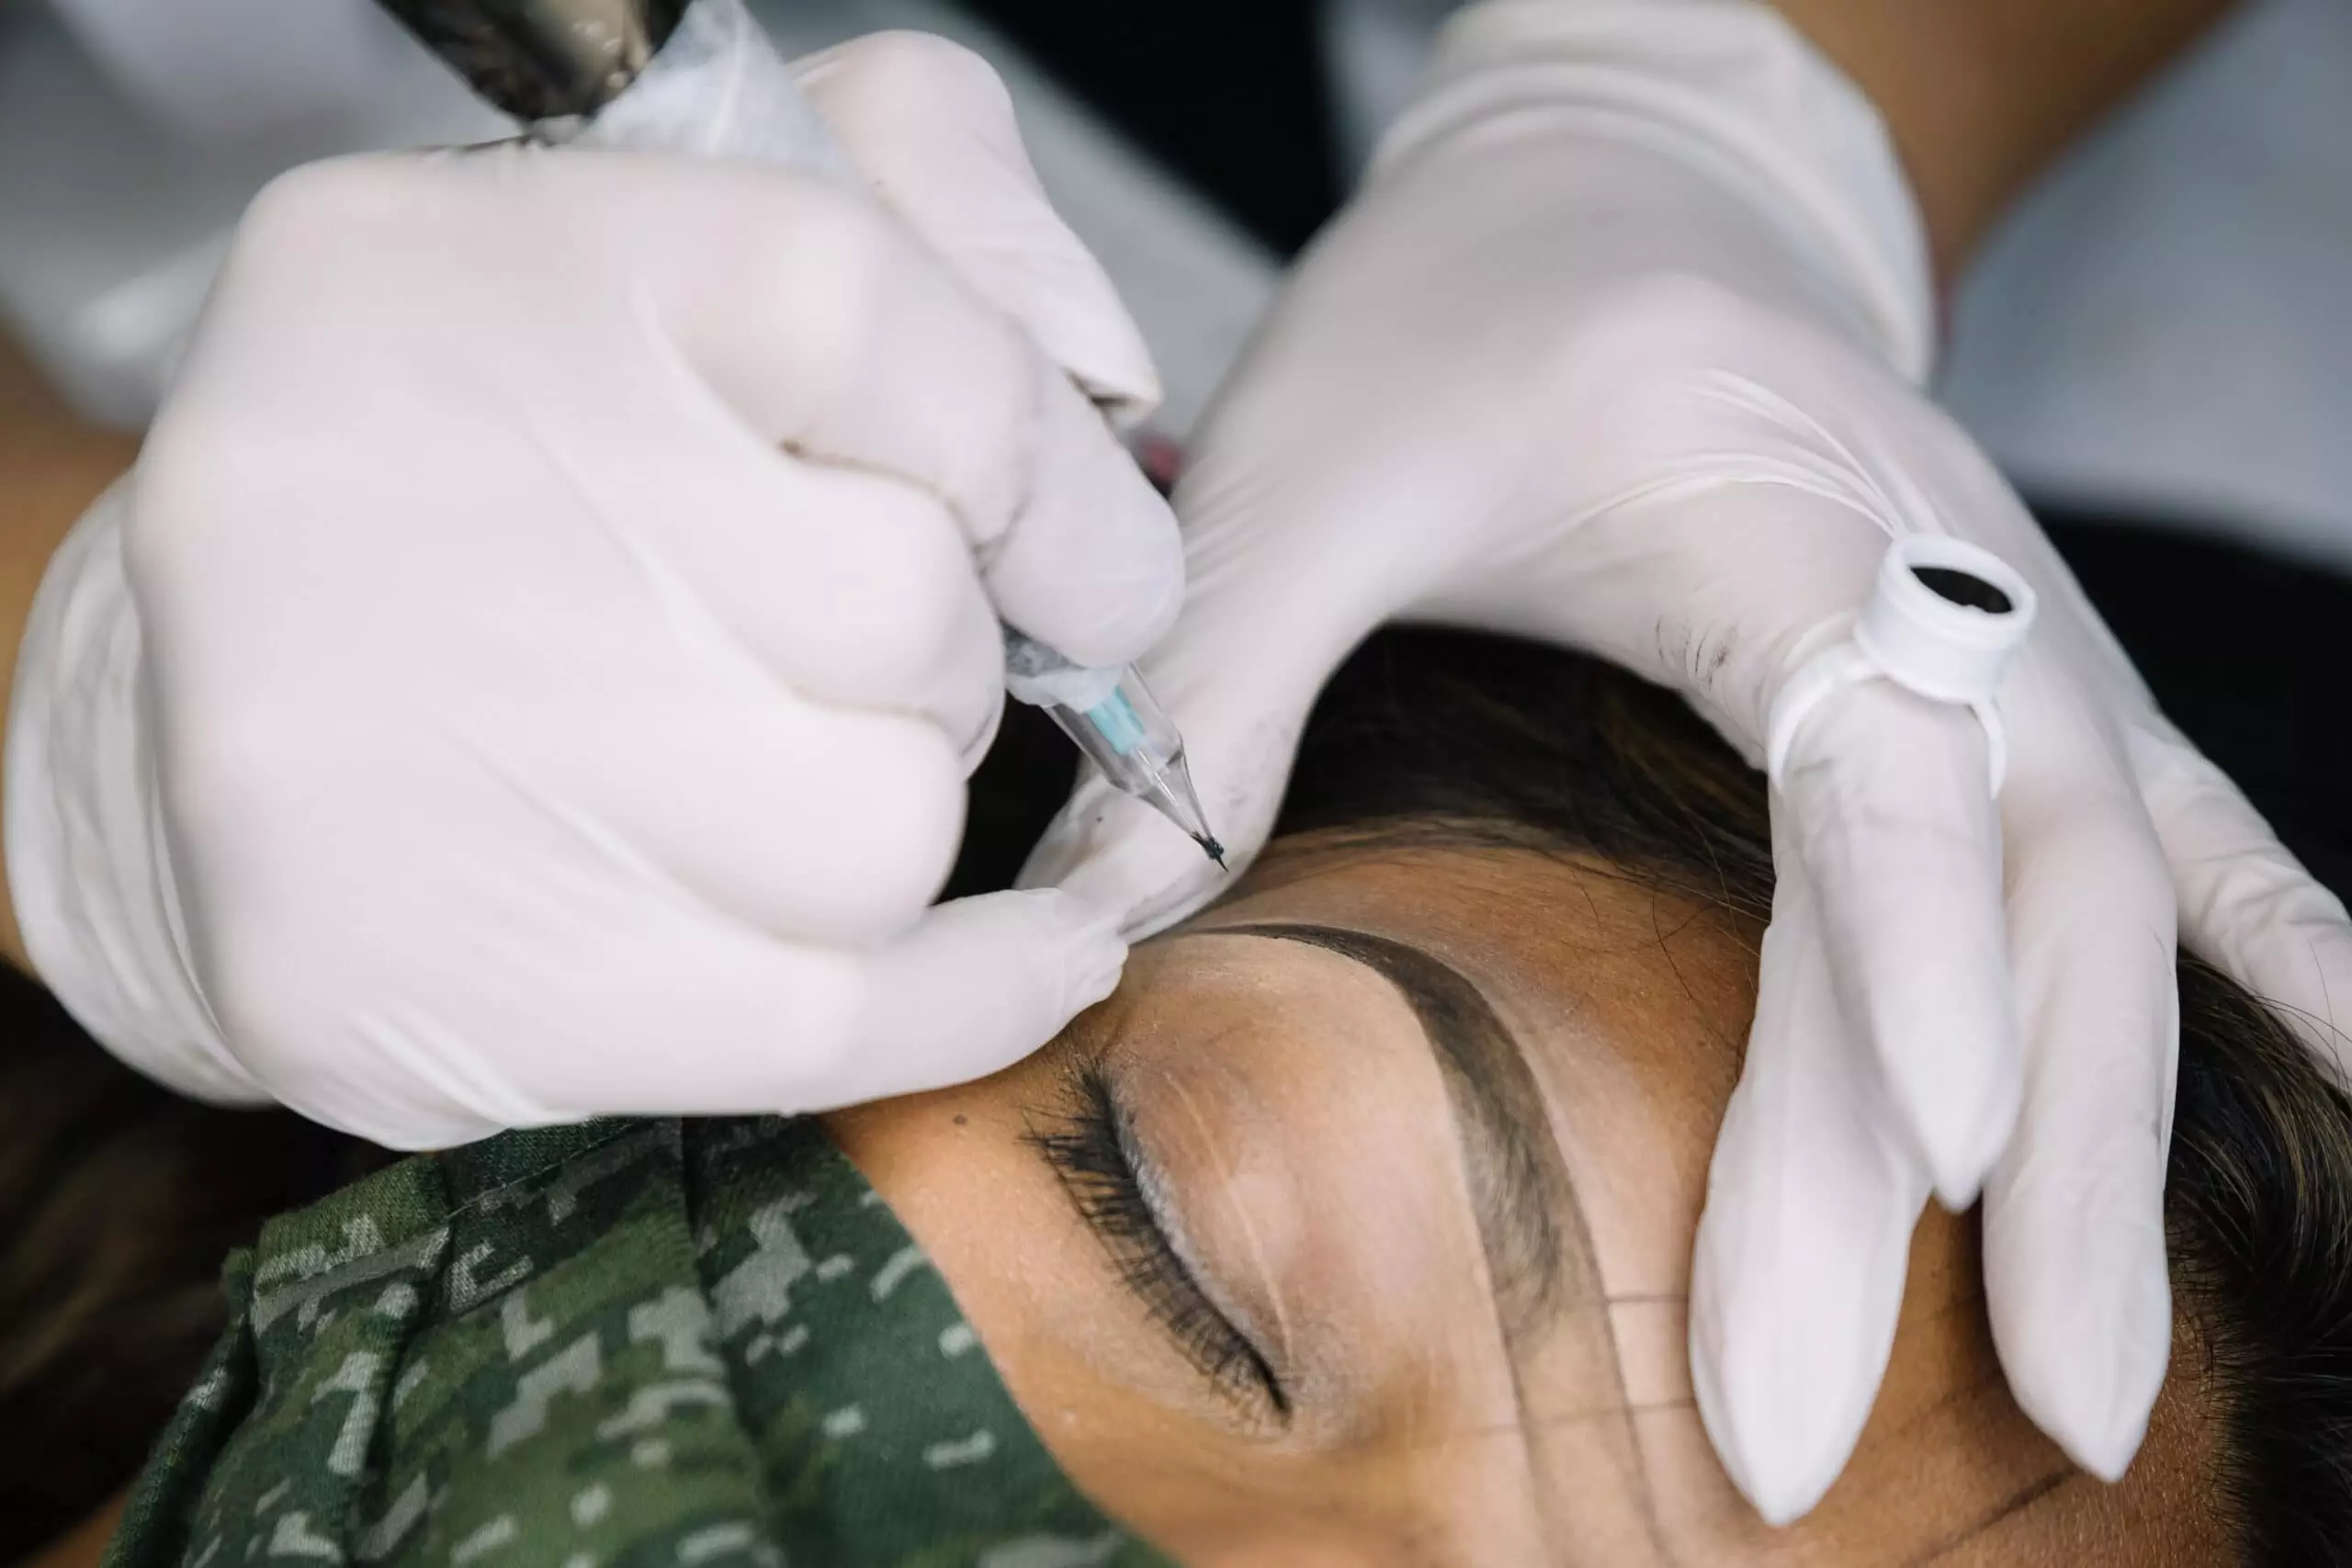 Microblading Healing Process For Eyebrows